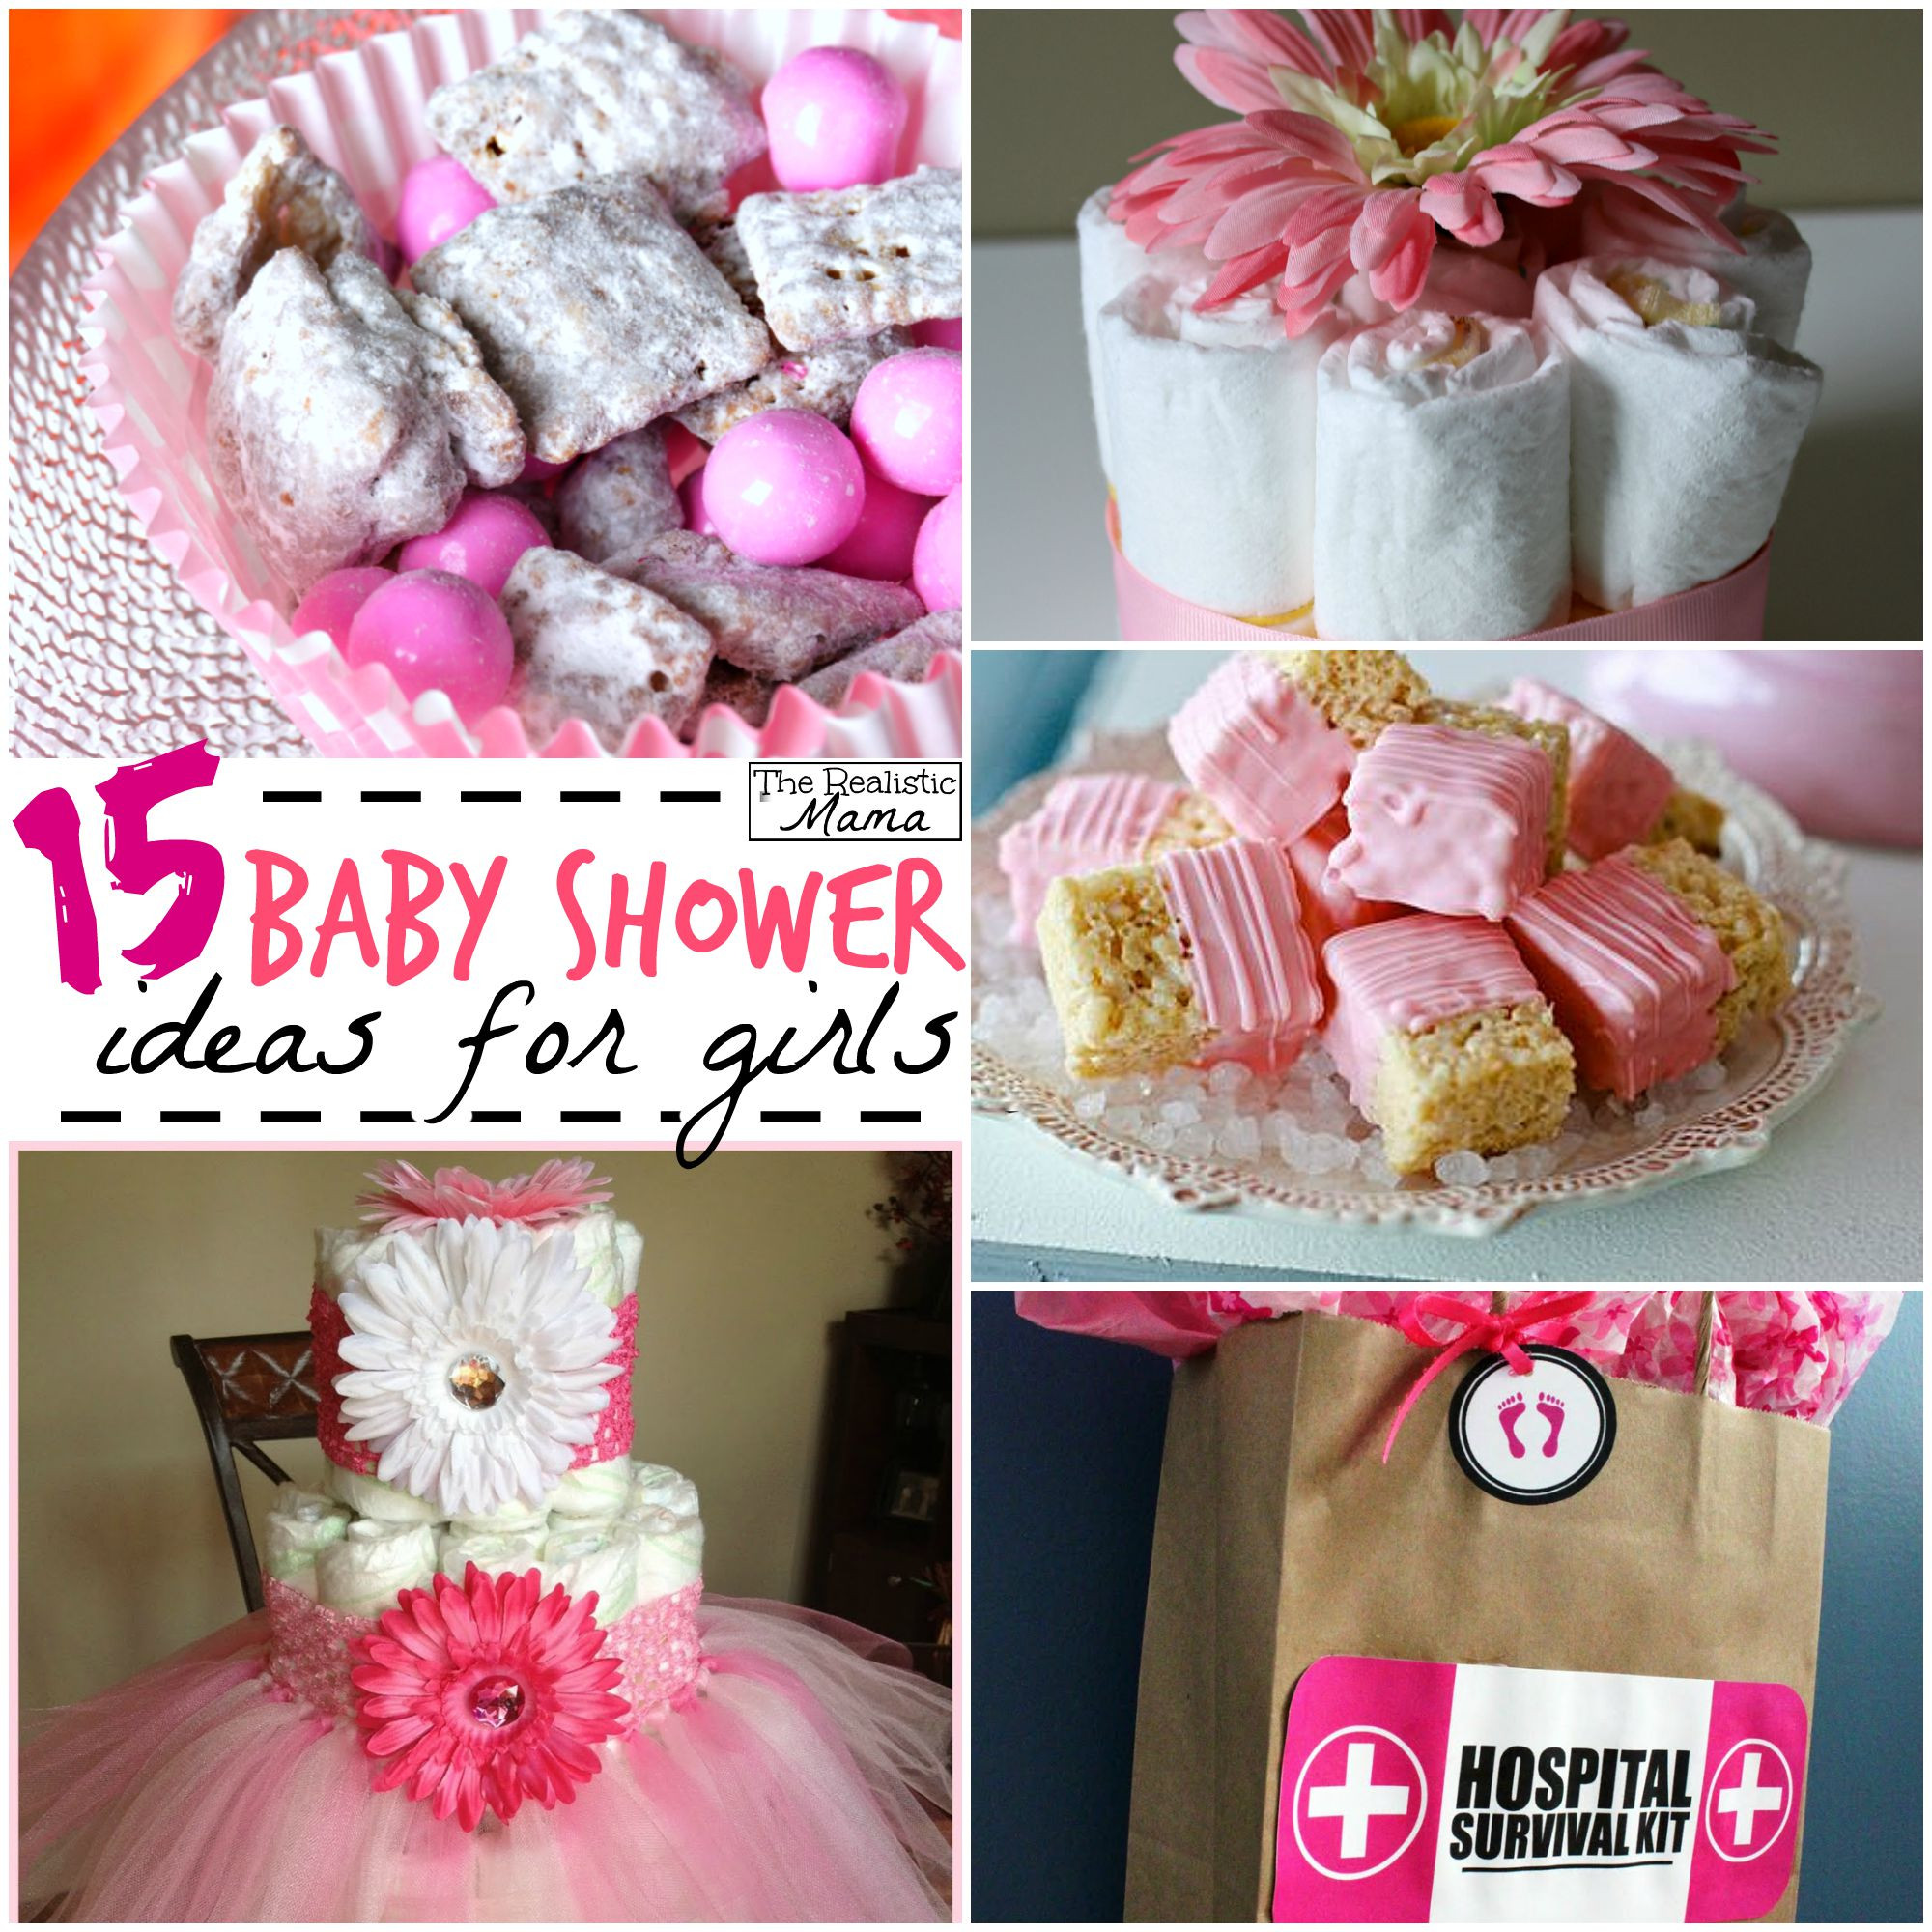 Baby Shower Gift Ideas For Girl
 15 Baby Shower Ideas for Girls The Realistic Mama